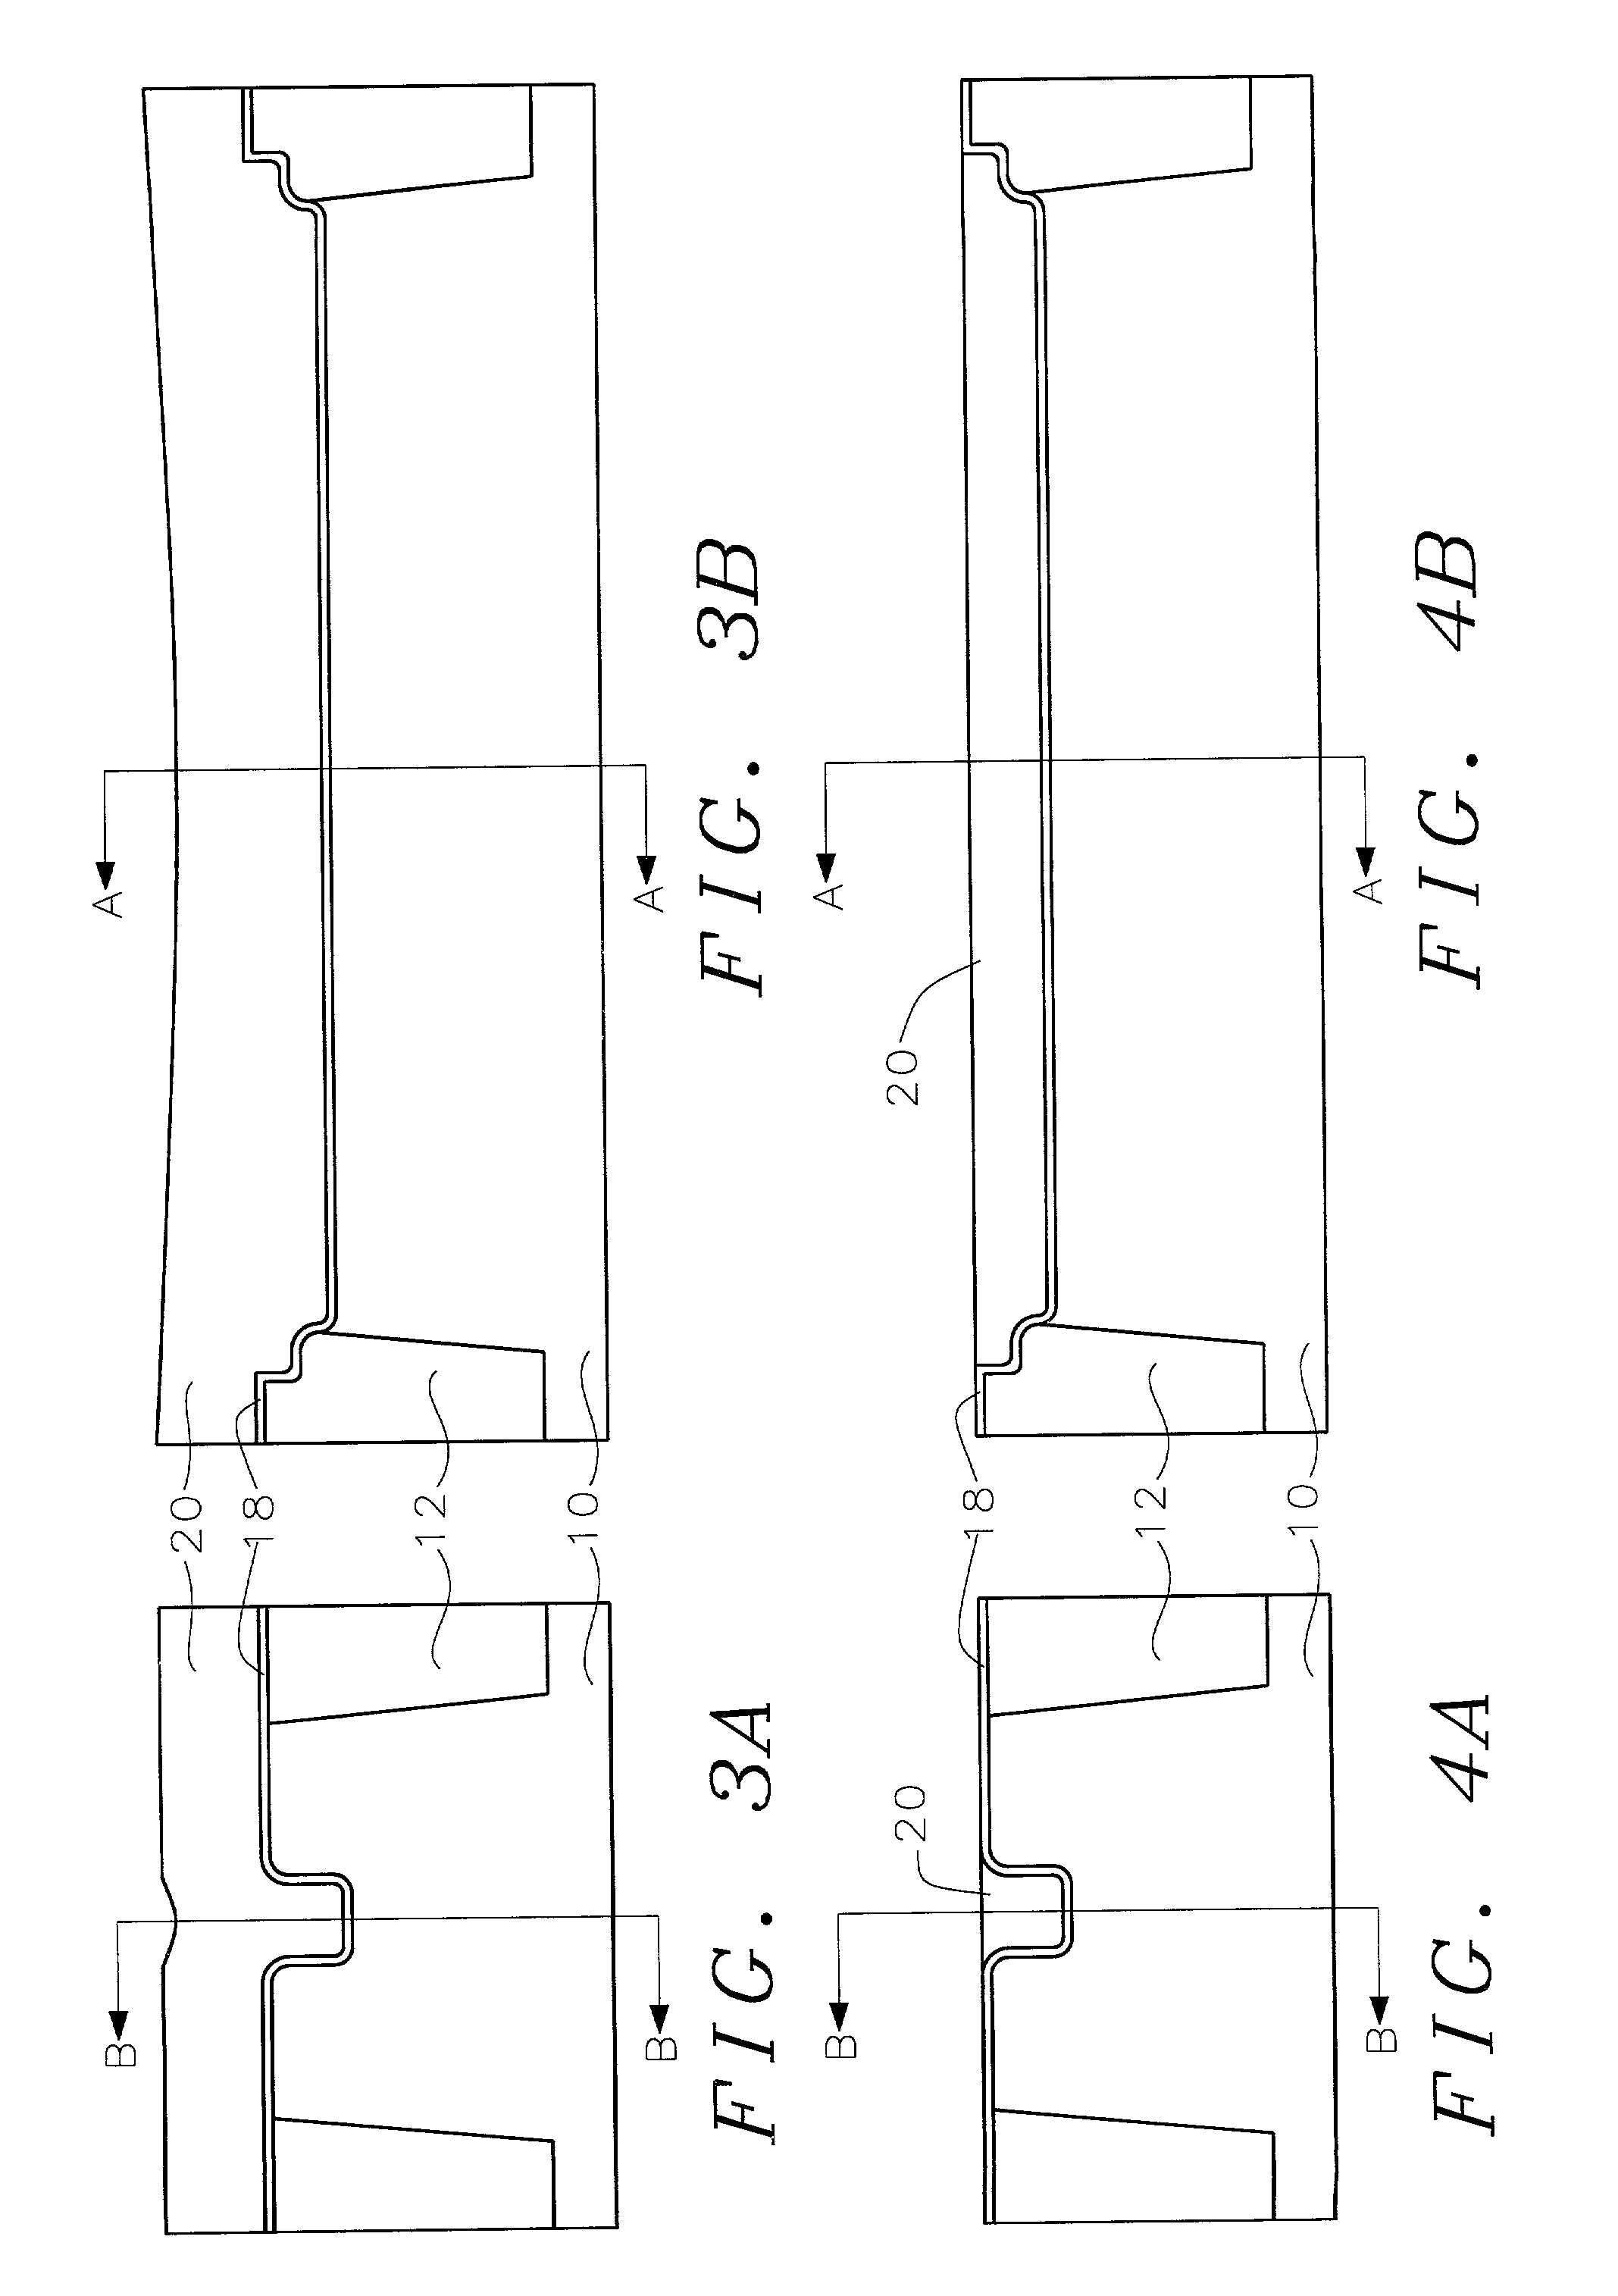 Process flow for a performance enhanced MOSFET with self-aligned, recessed channel